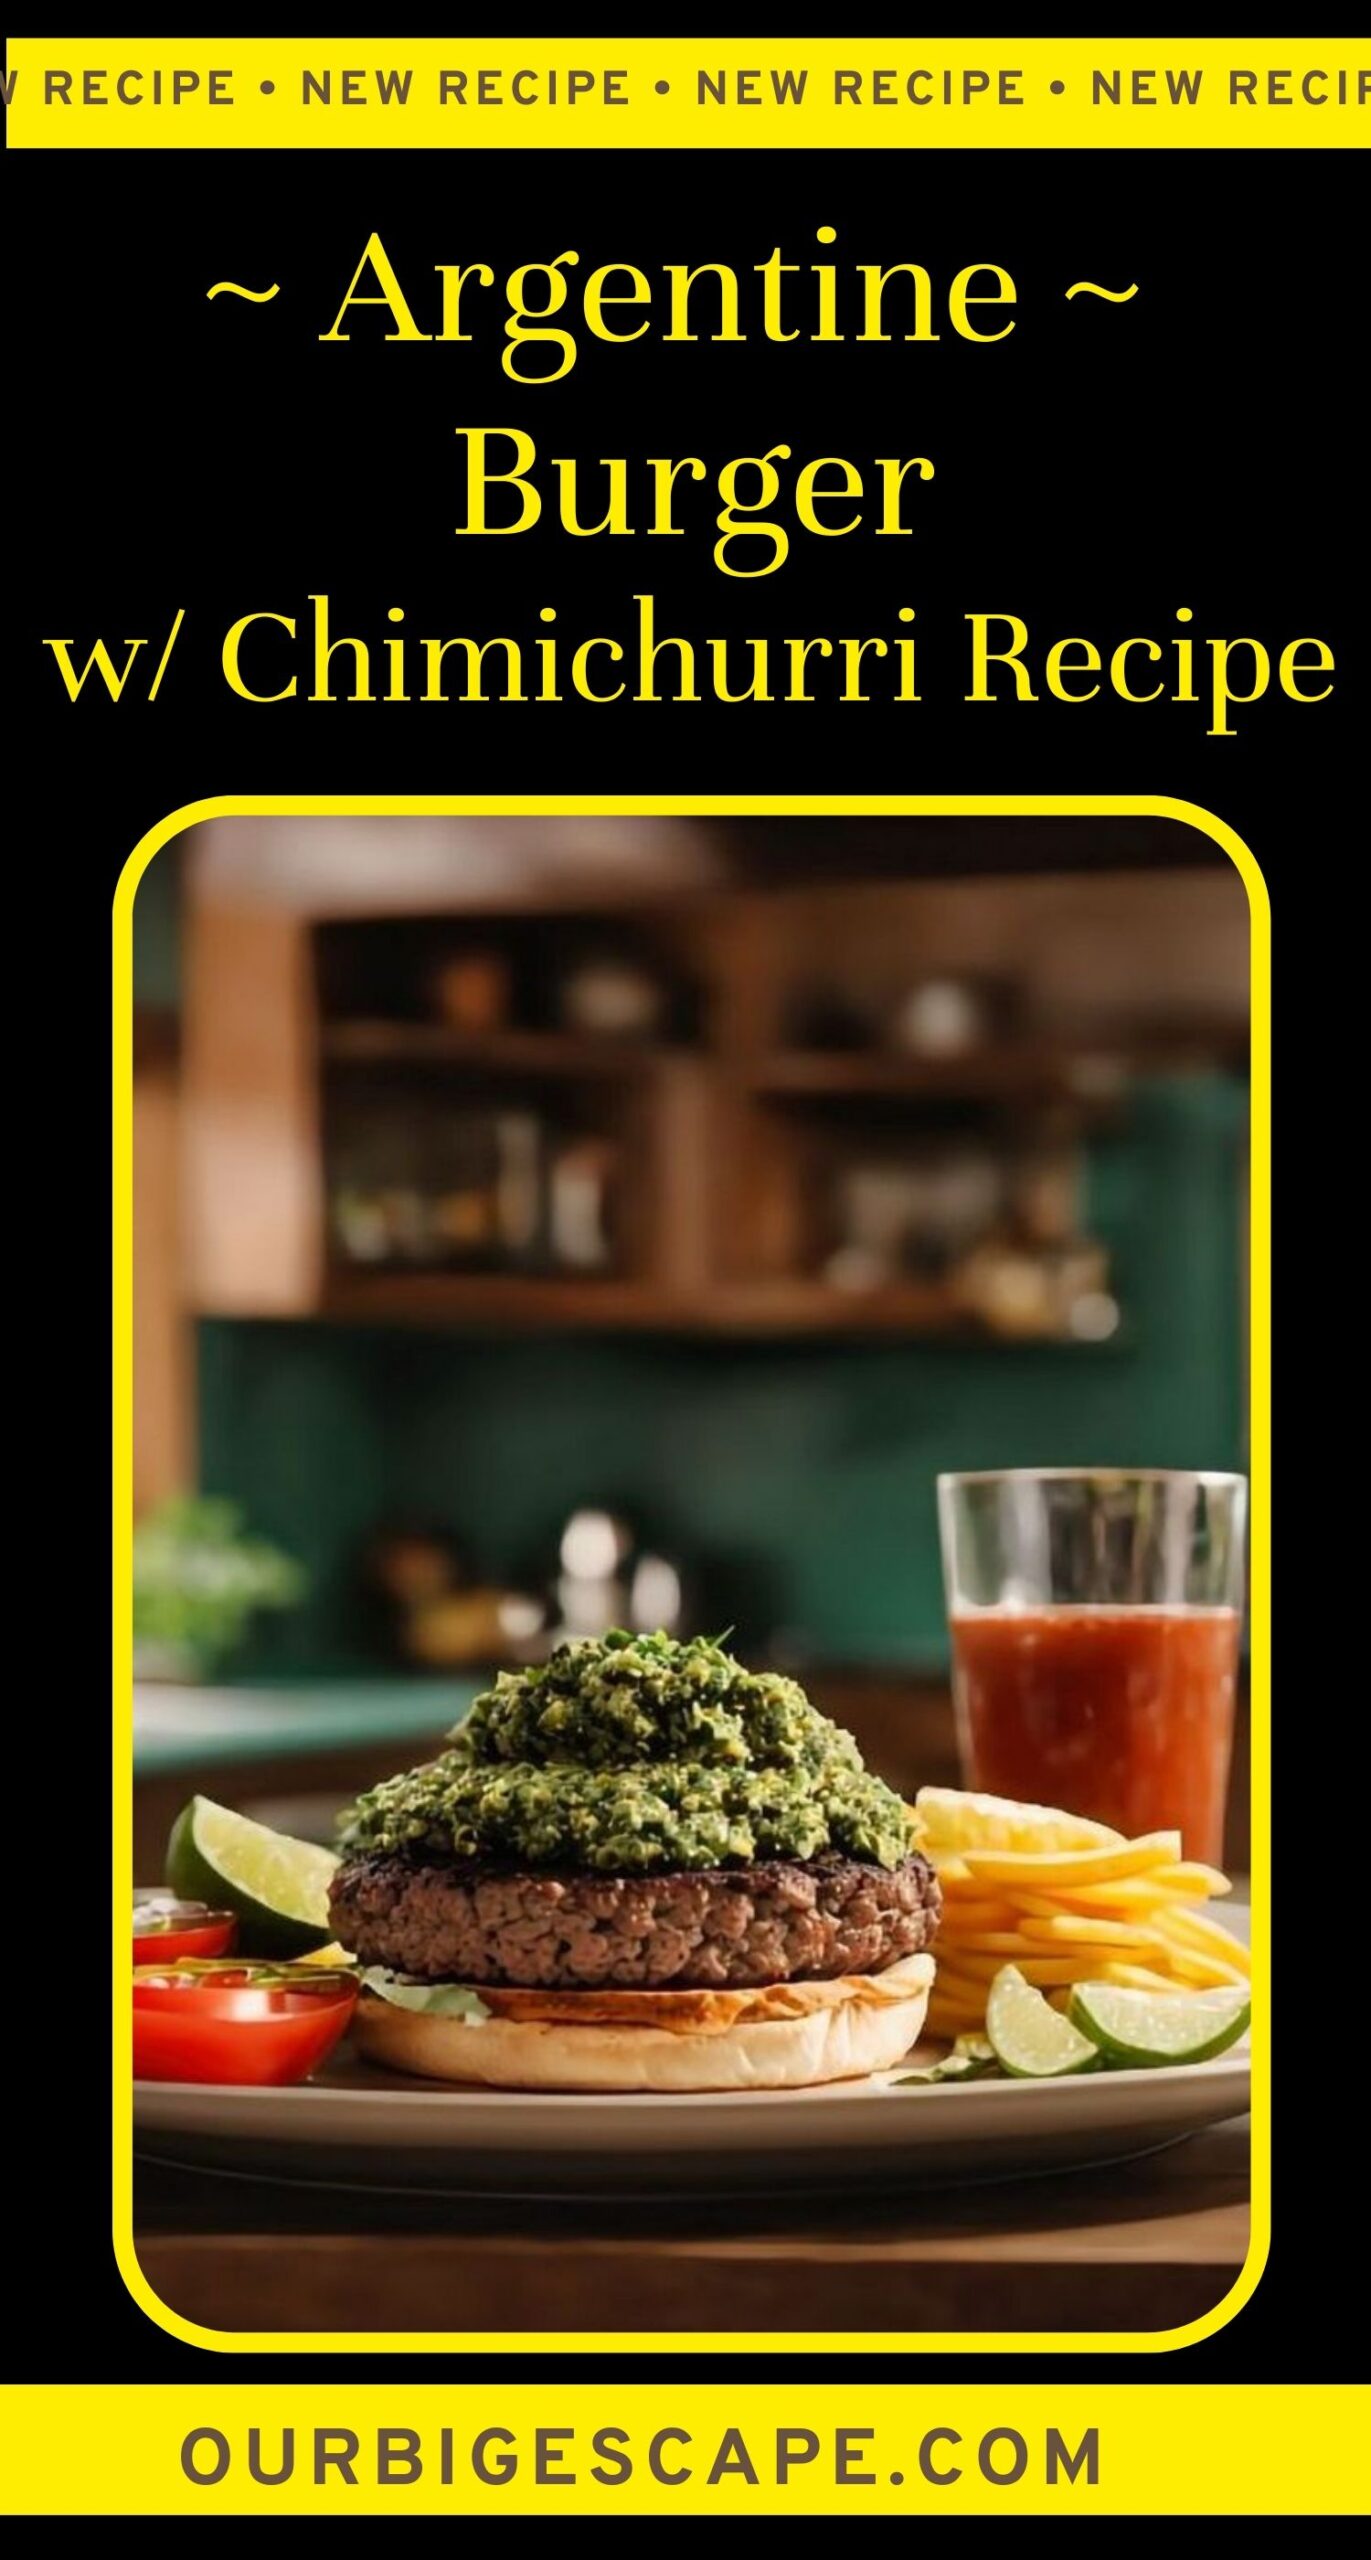 6. The Argentine Burger with Chimichurri Recipe